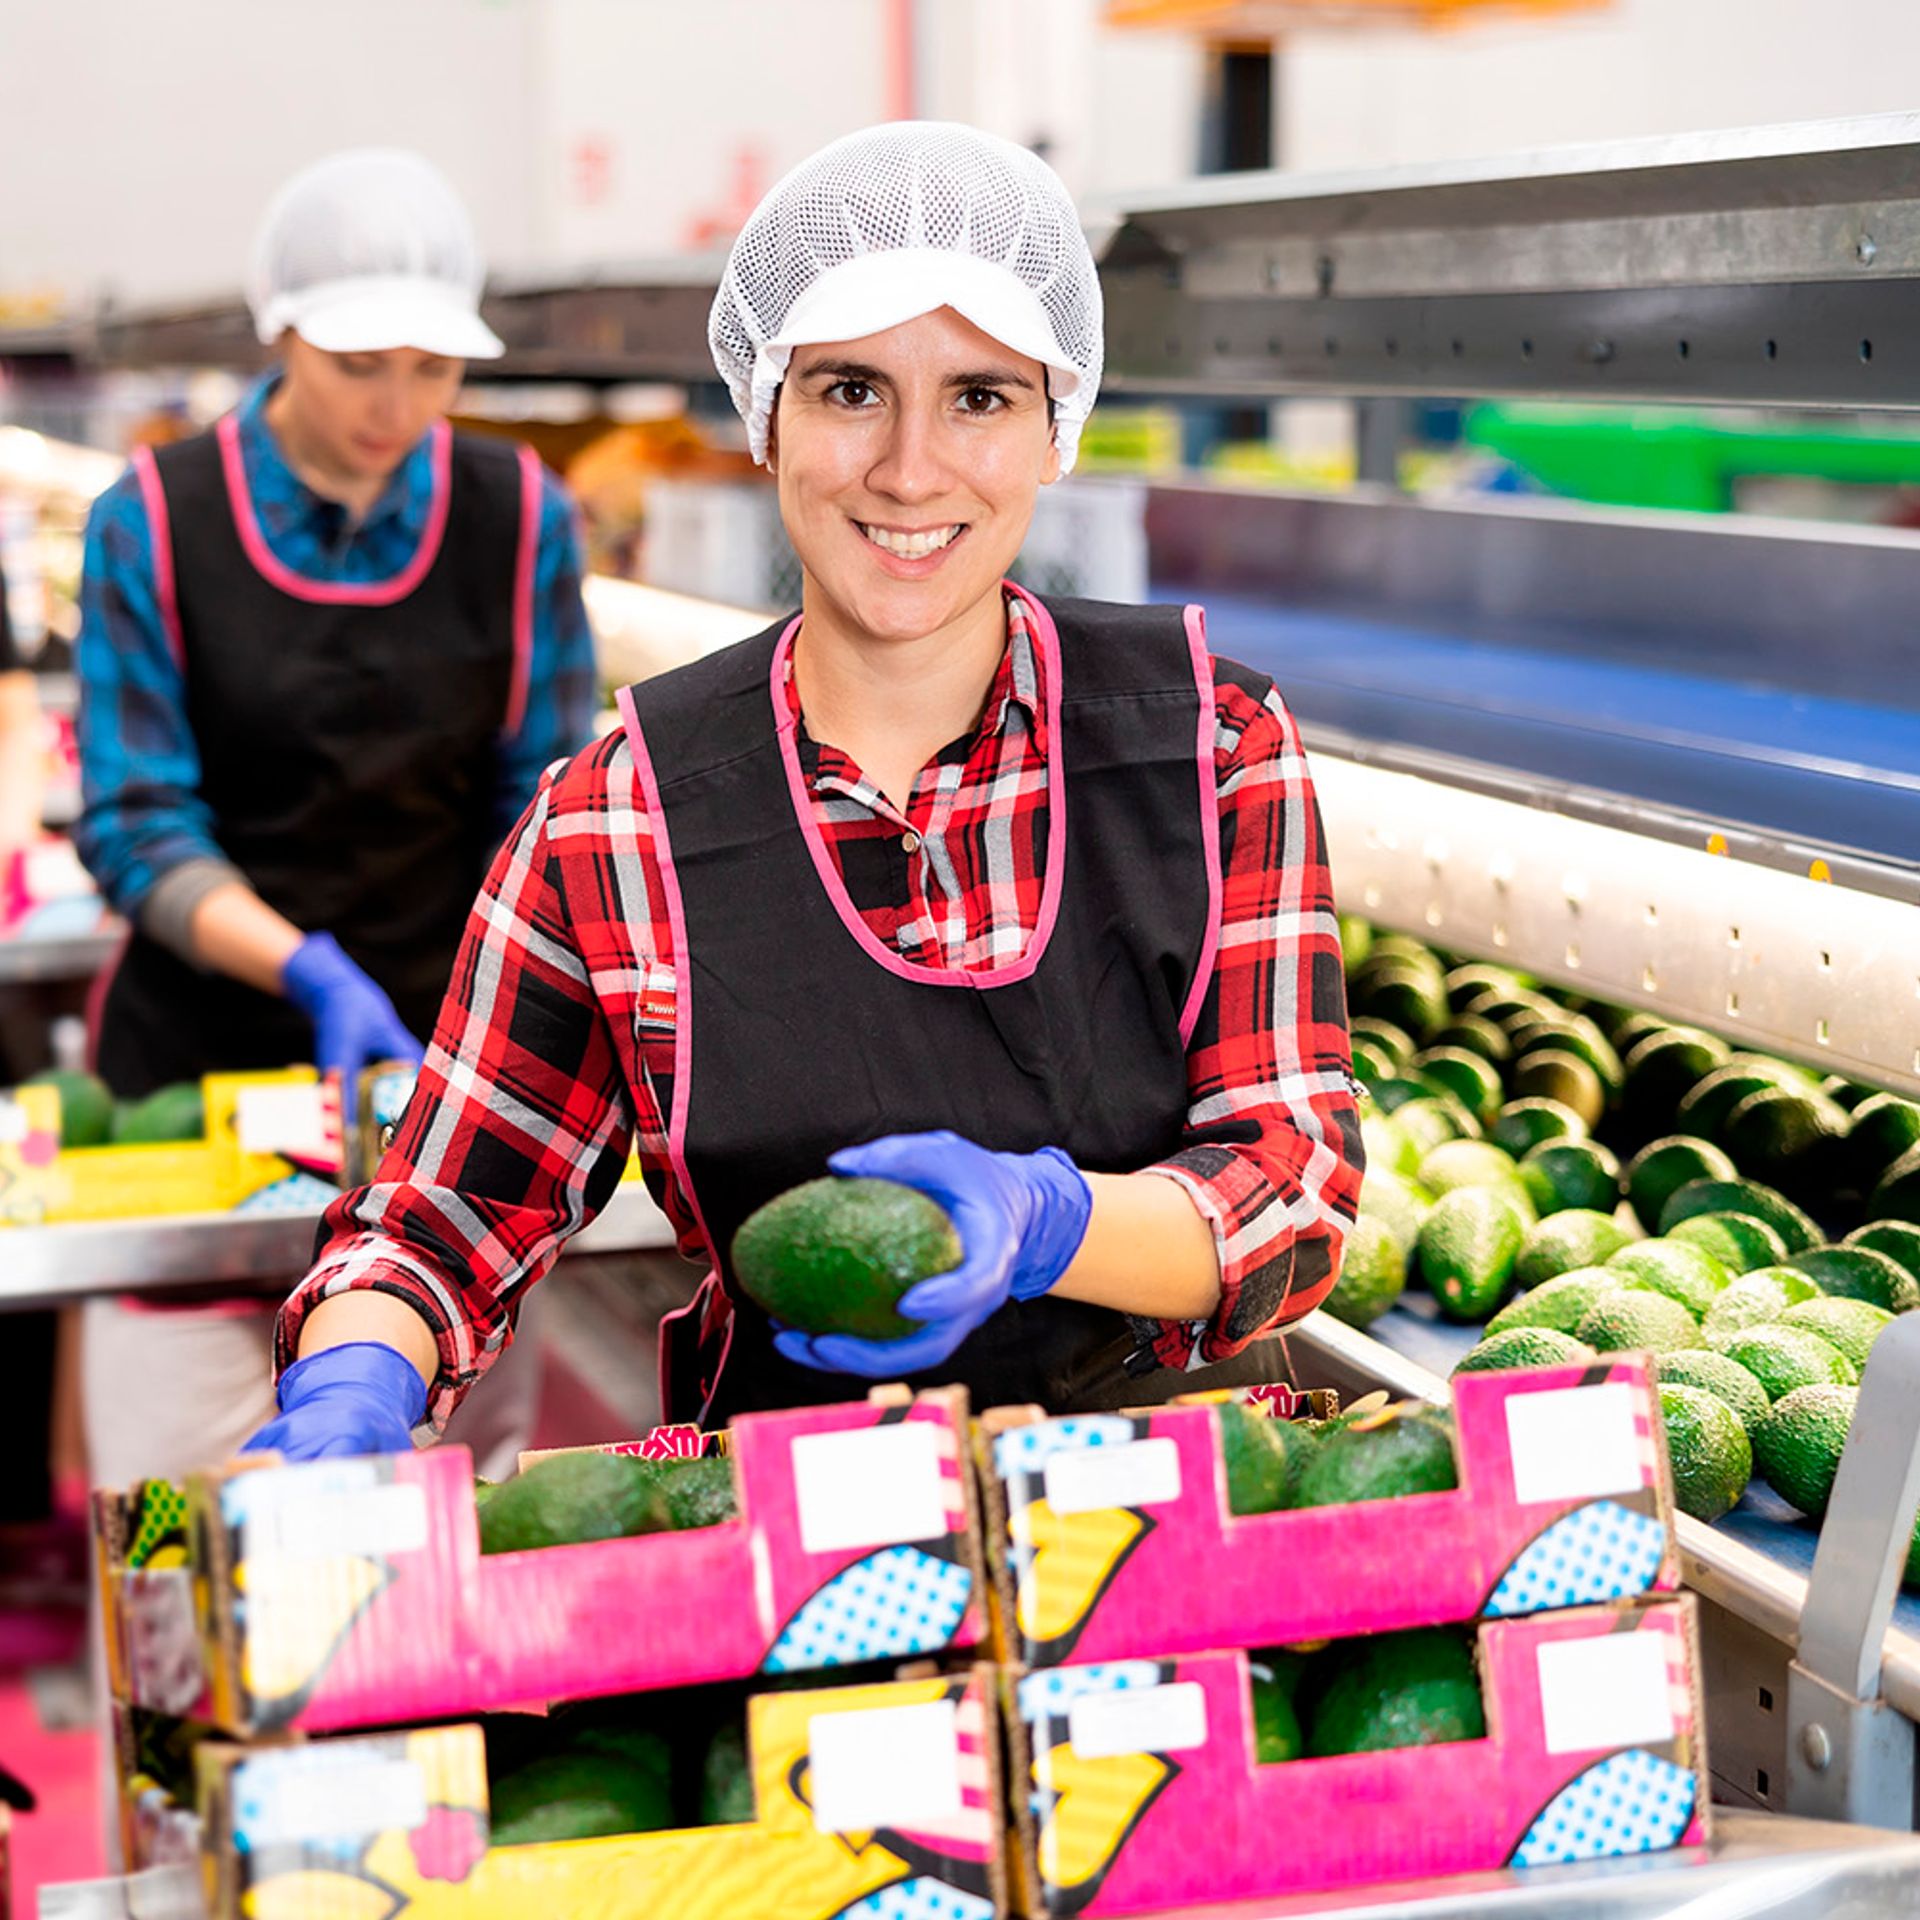 Image of a fresh produce processor packing fruit and vegetables for transport